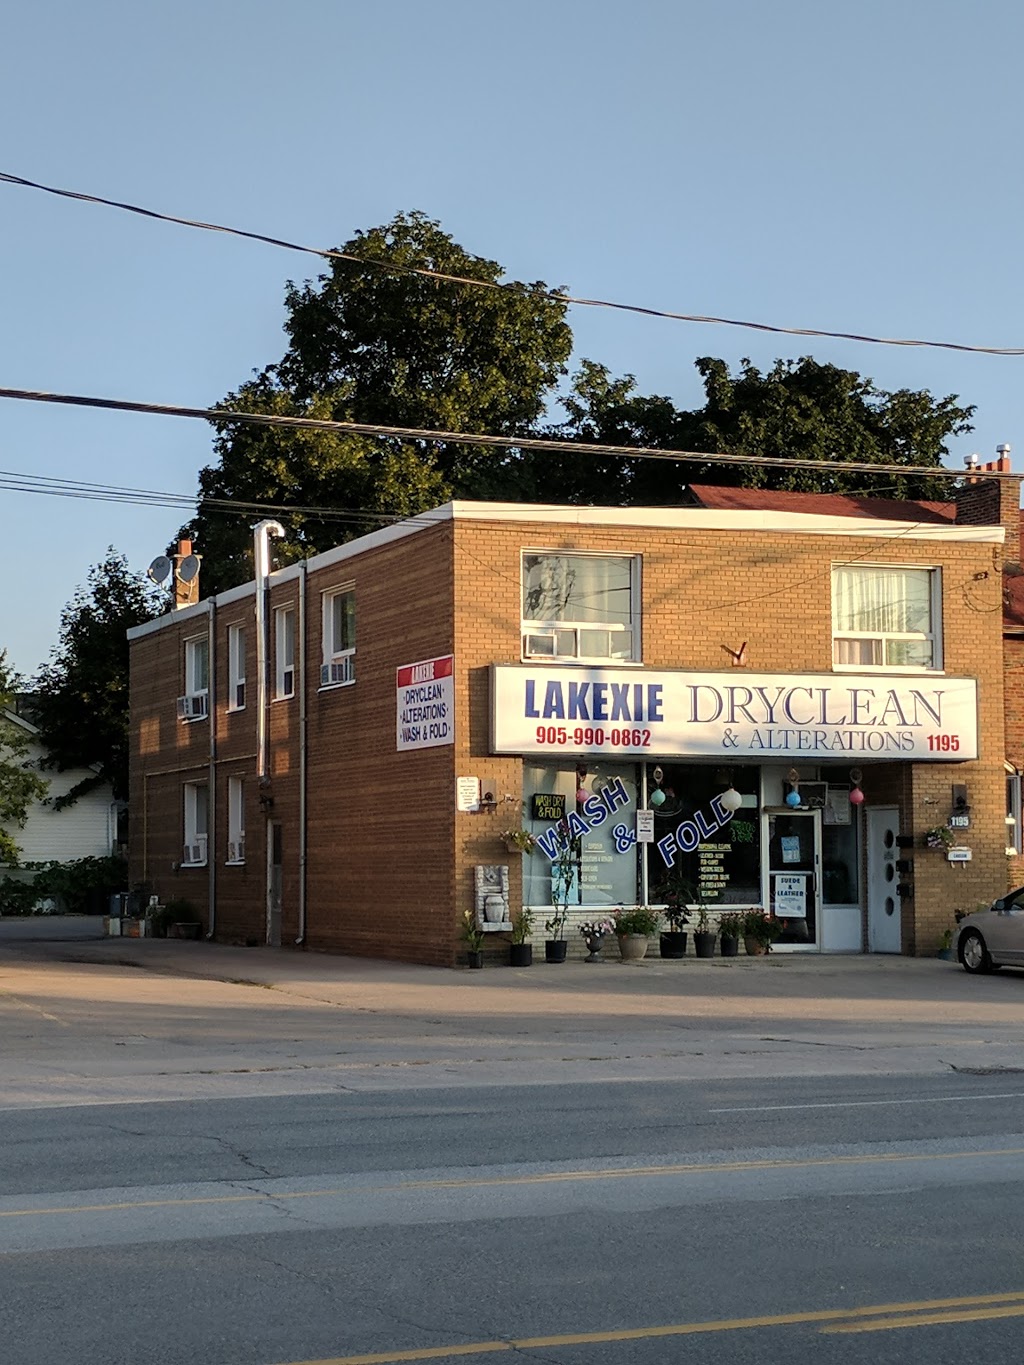 Lakexie Dryclean & Alterations | Mississauga, ON L5E 1G1, Canada | Phone: (905) 990-0862